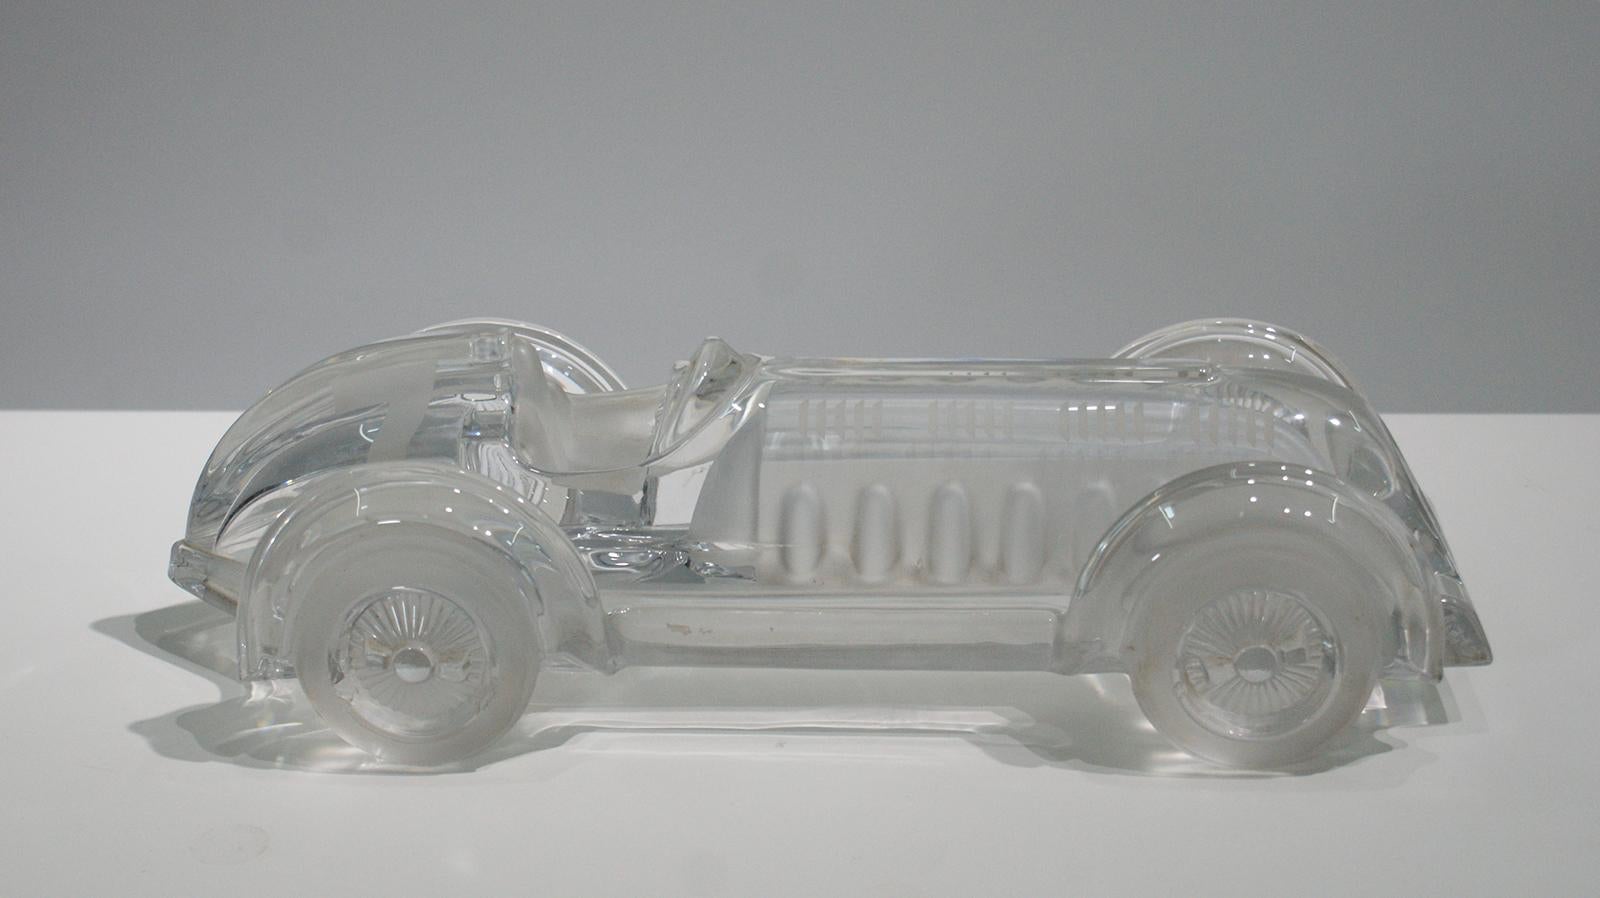 Signed Daum France, Crystal Sculpture of Vintage Race Car in Limited Edition 4